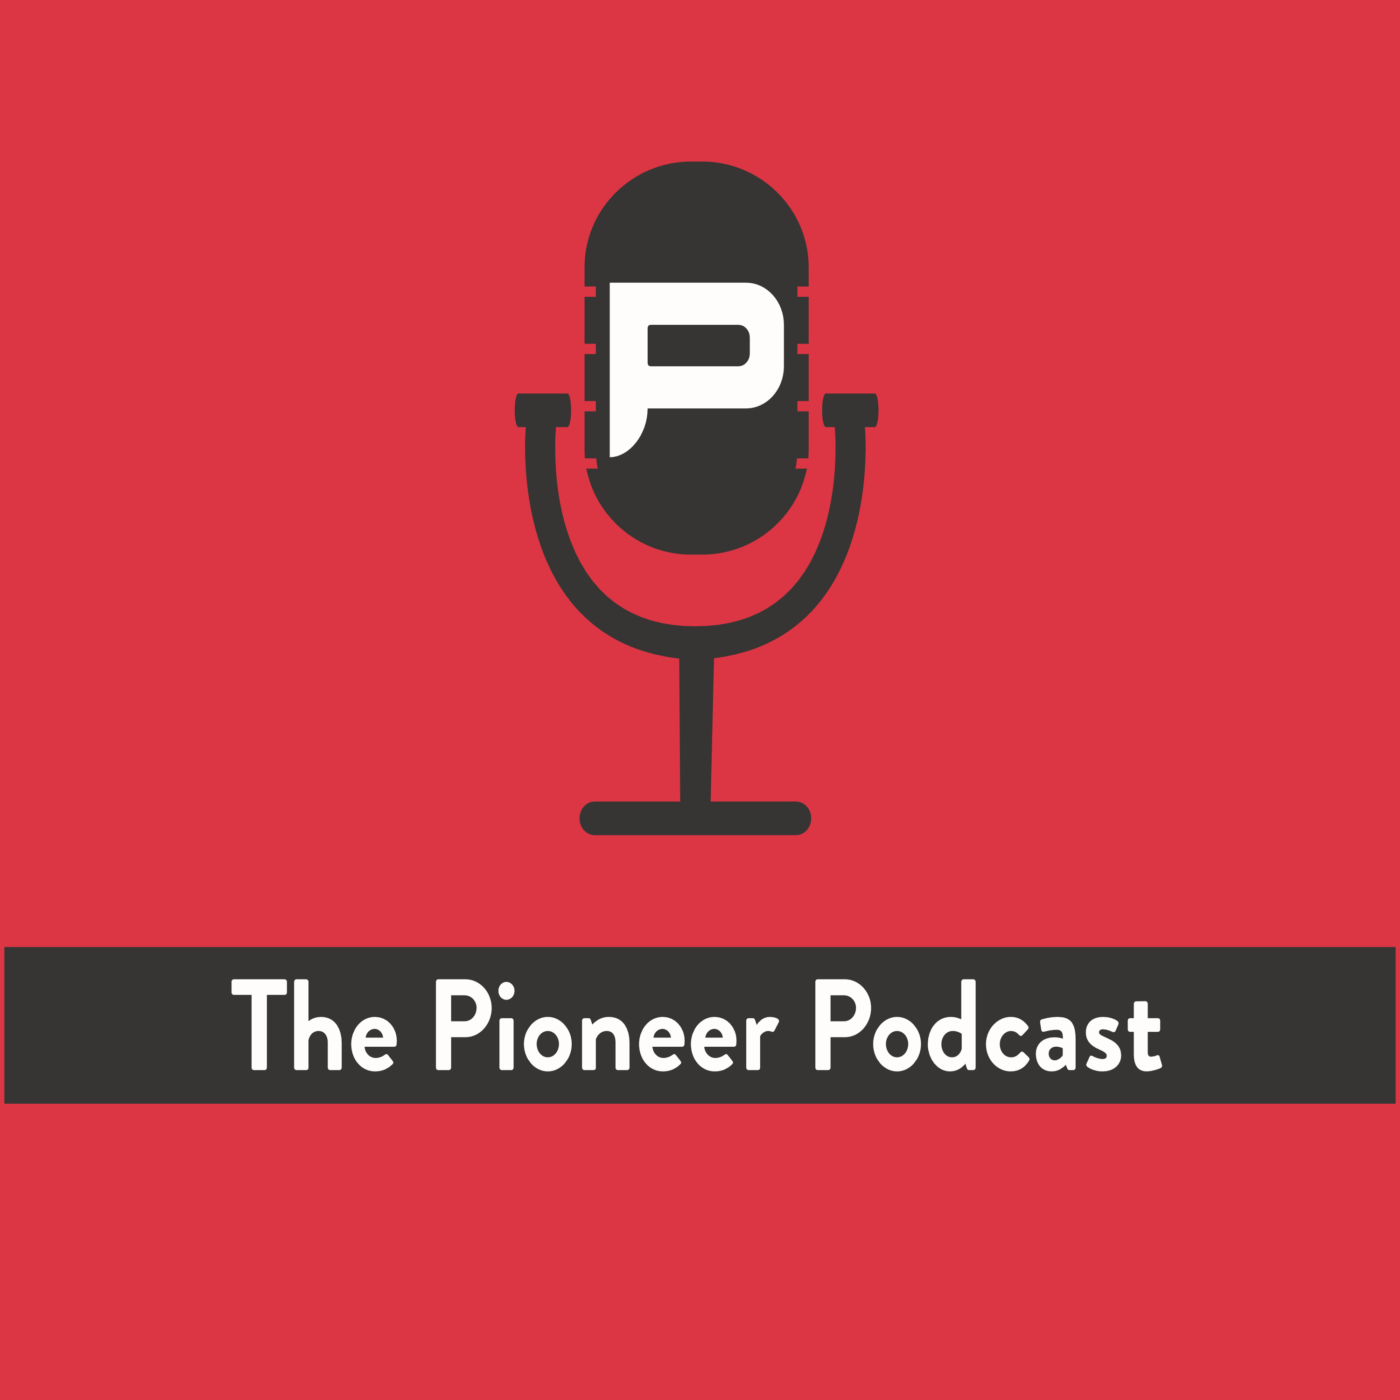 The Pioneer Podcast